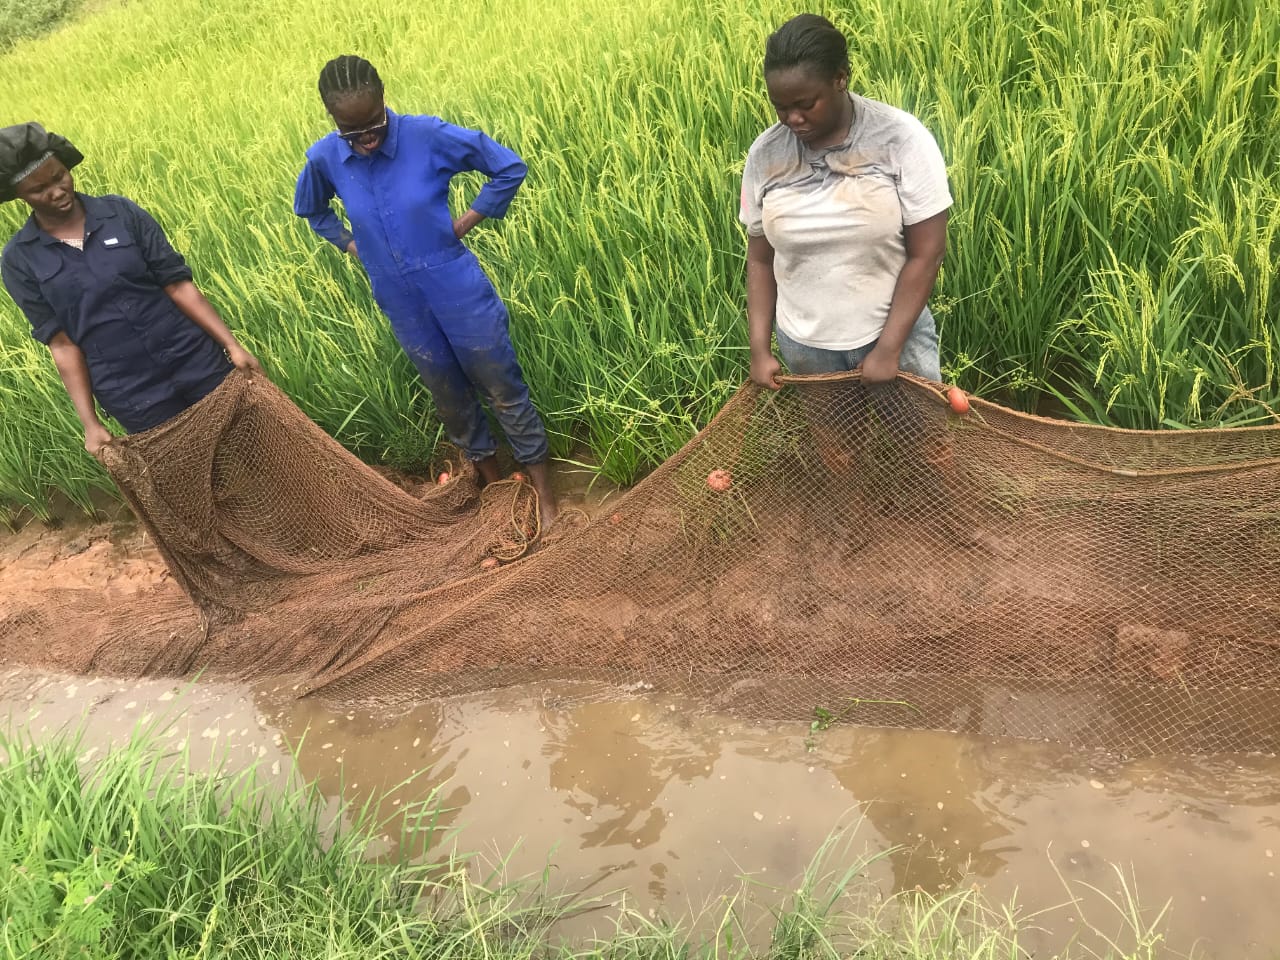 Graduate student from the University of Ibadan preparing to harvest fish from the adaptive rice-fish research plot